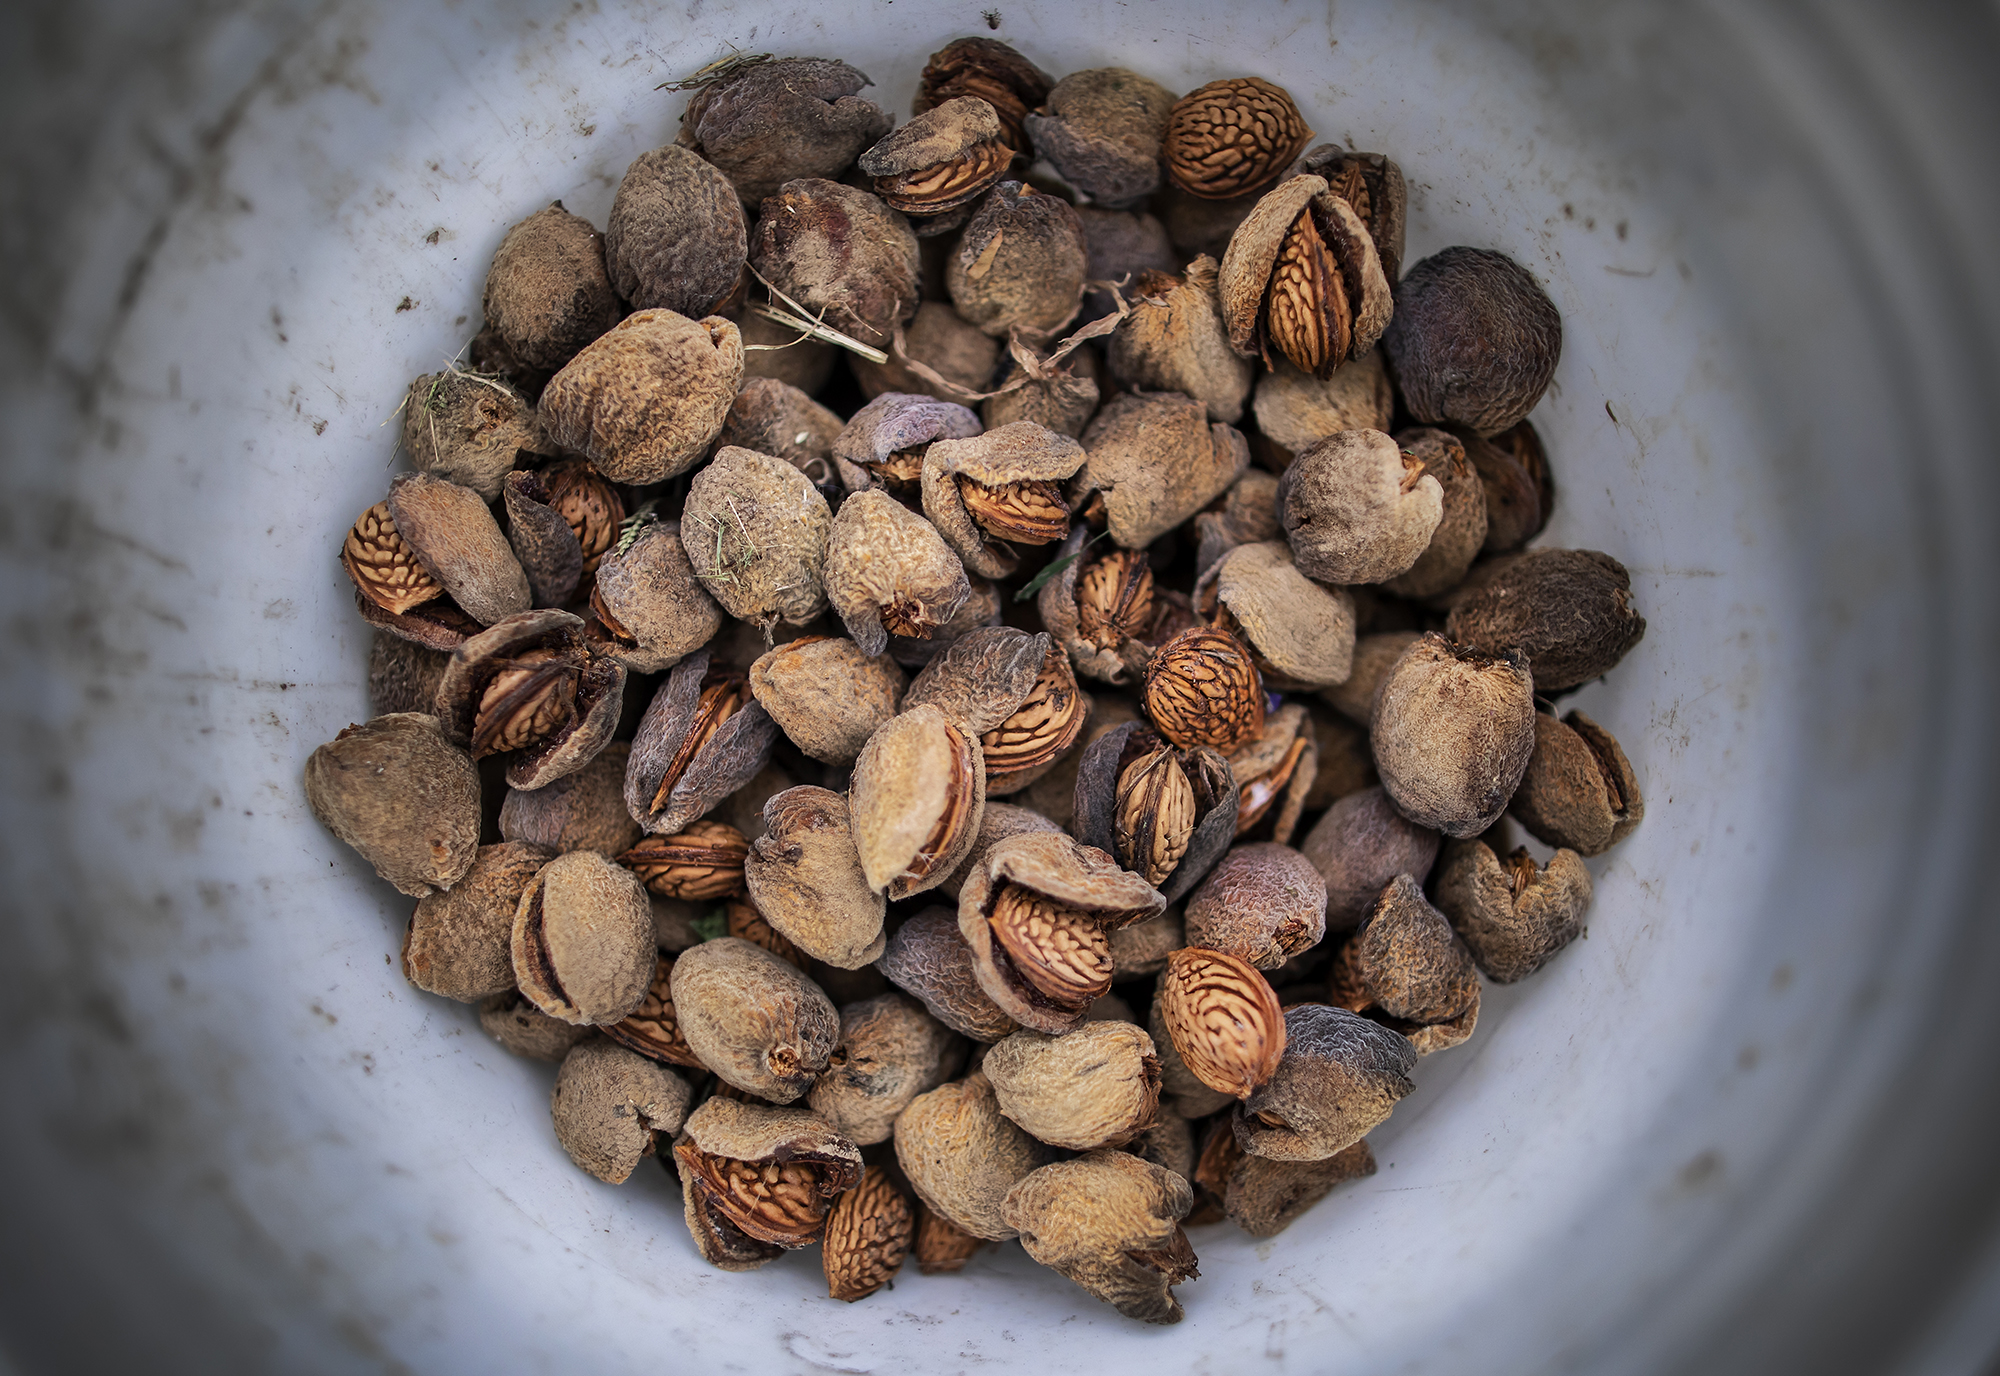 bowl of nuts from community garden